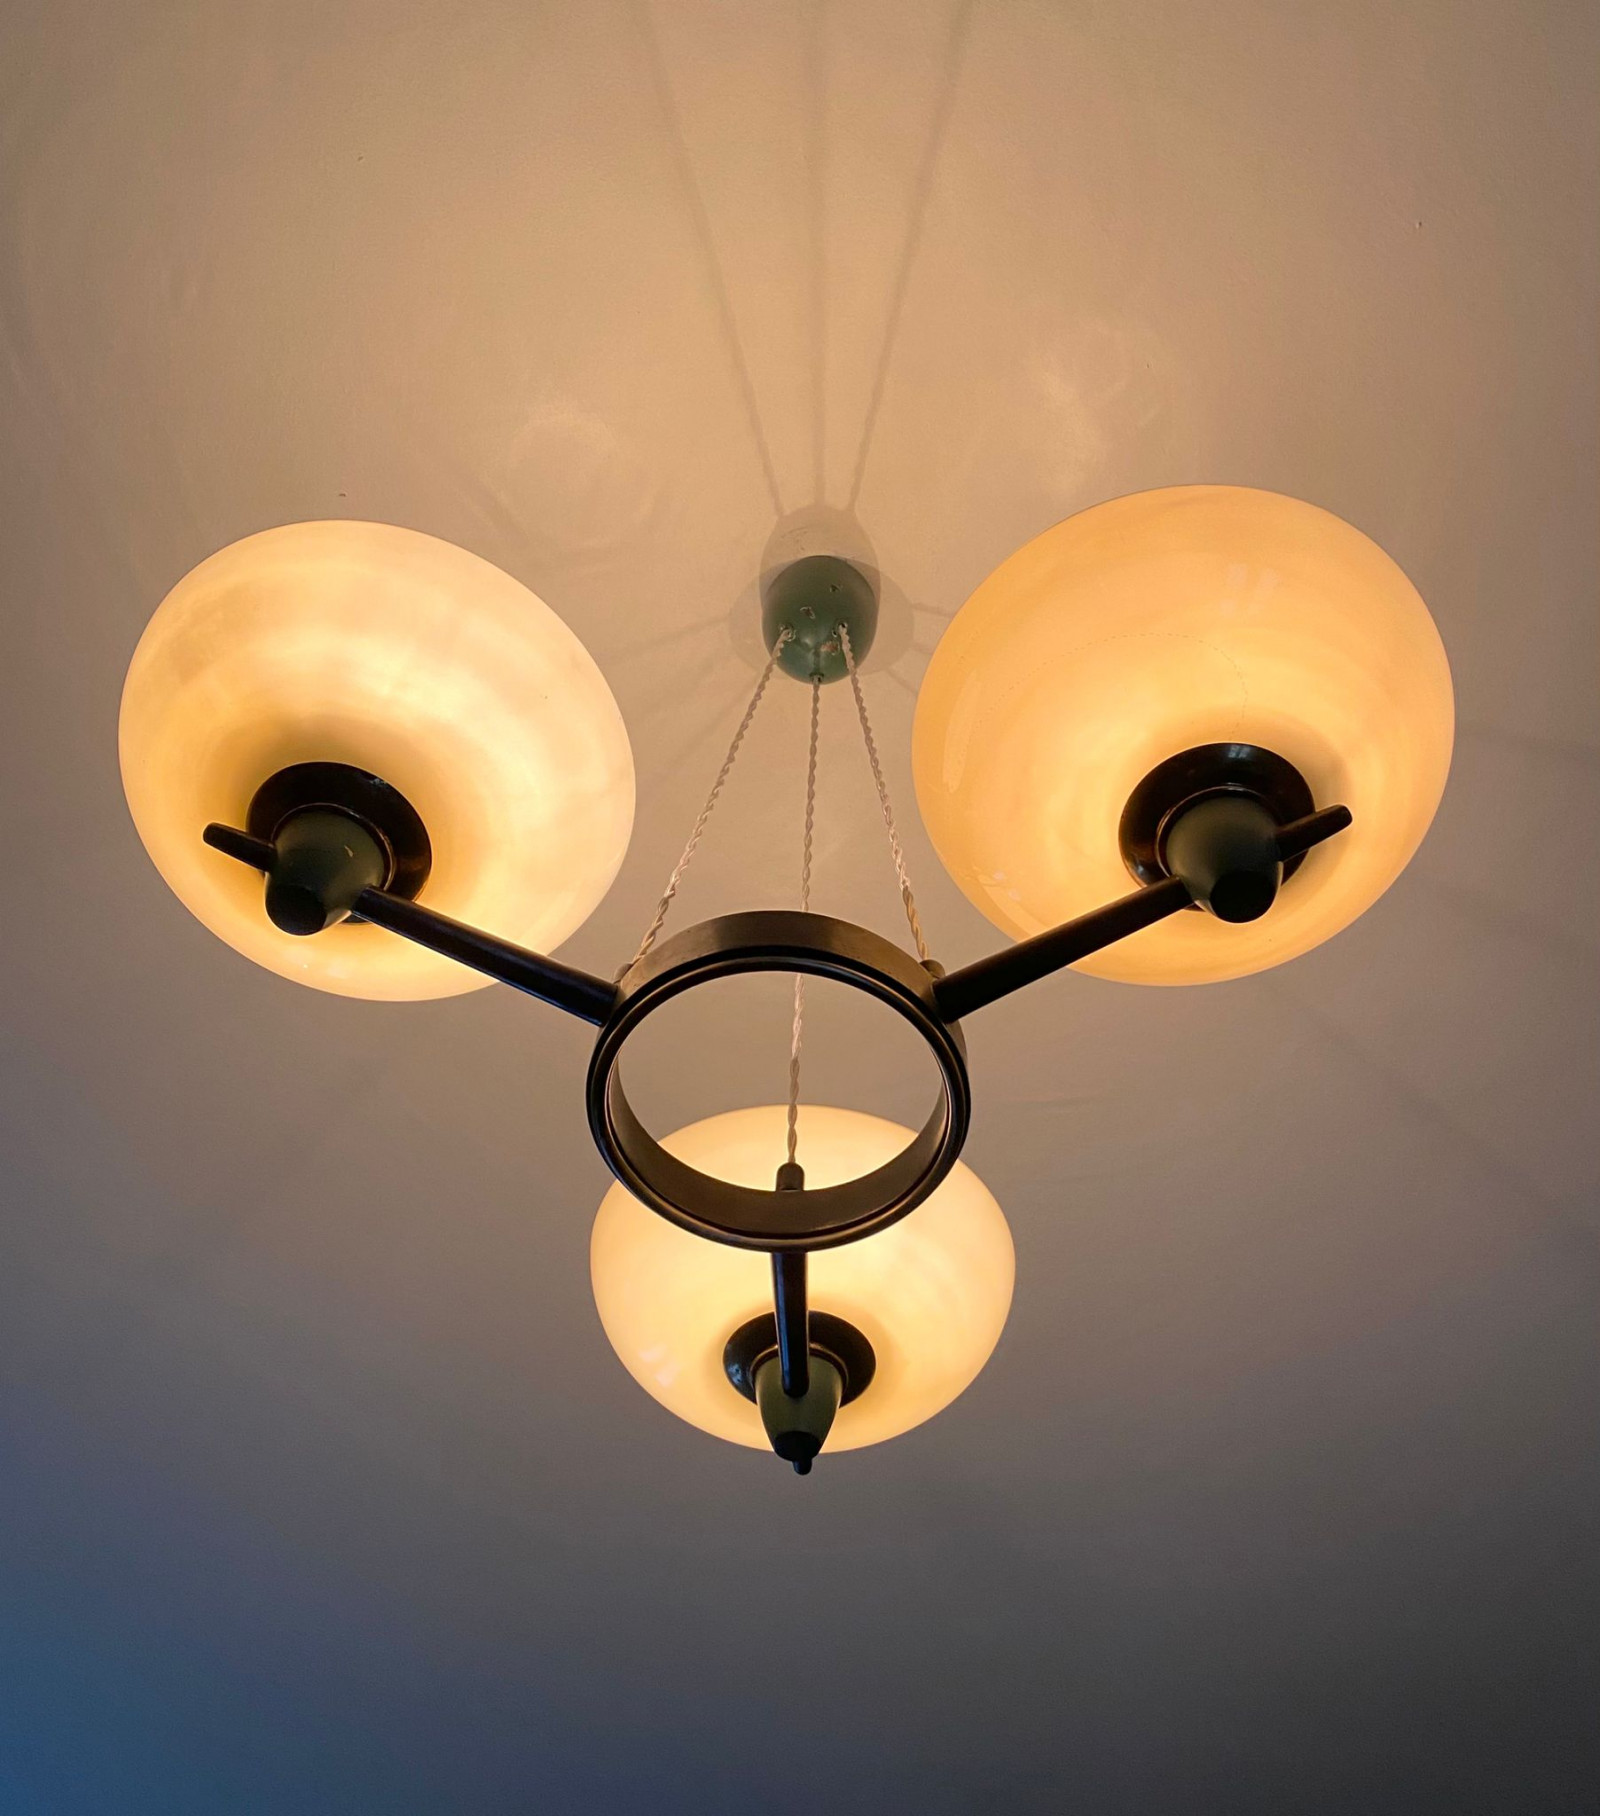 1940s Ceiling Light with 3 Murano Glasses